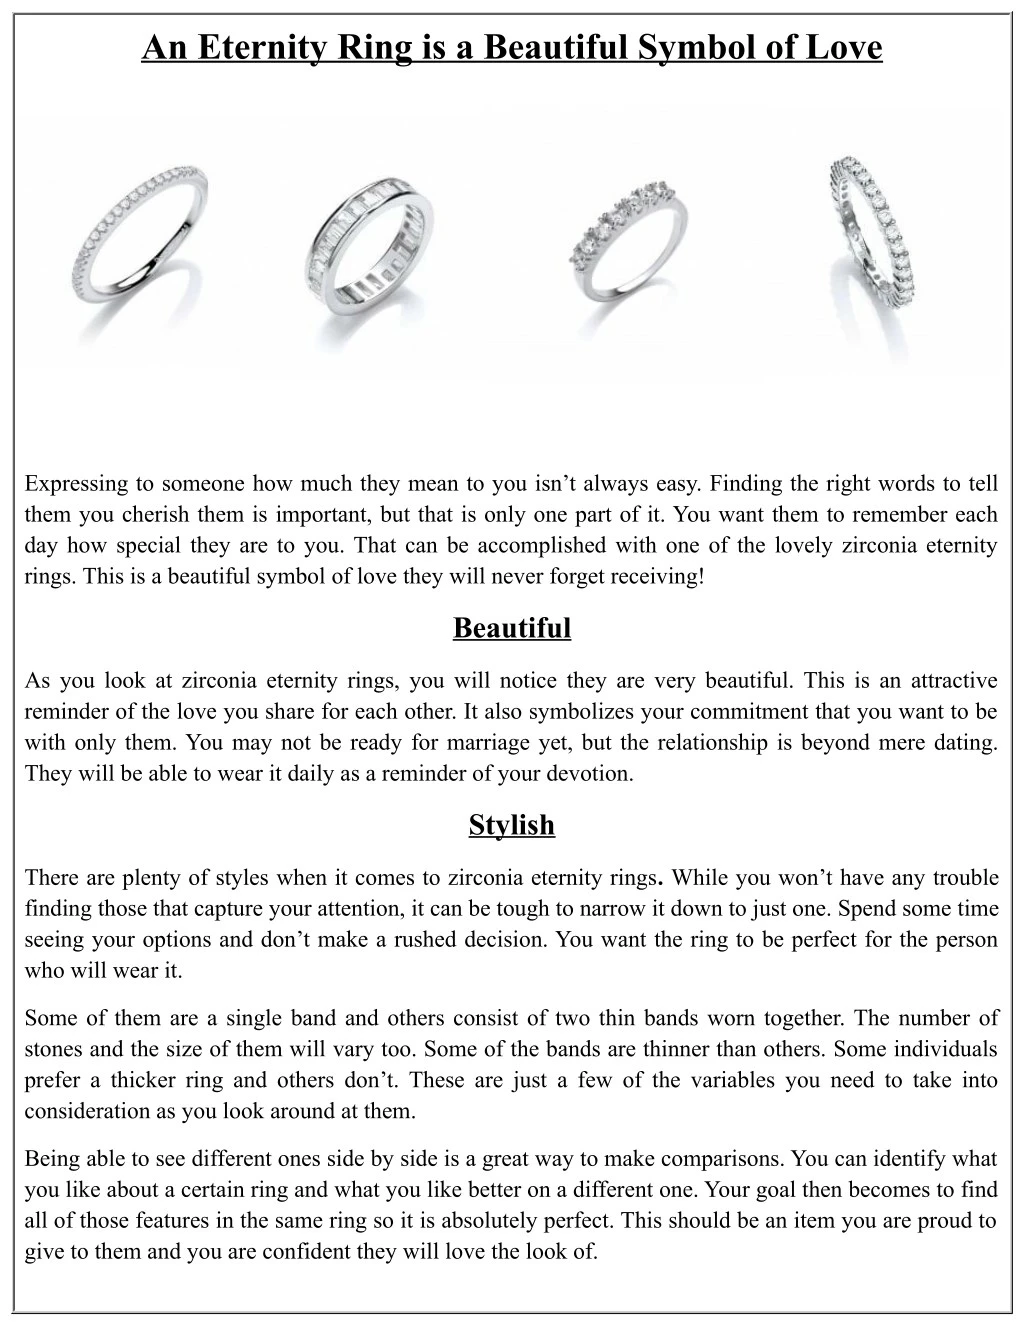 an eternity ring is a beautiful symbol of love